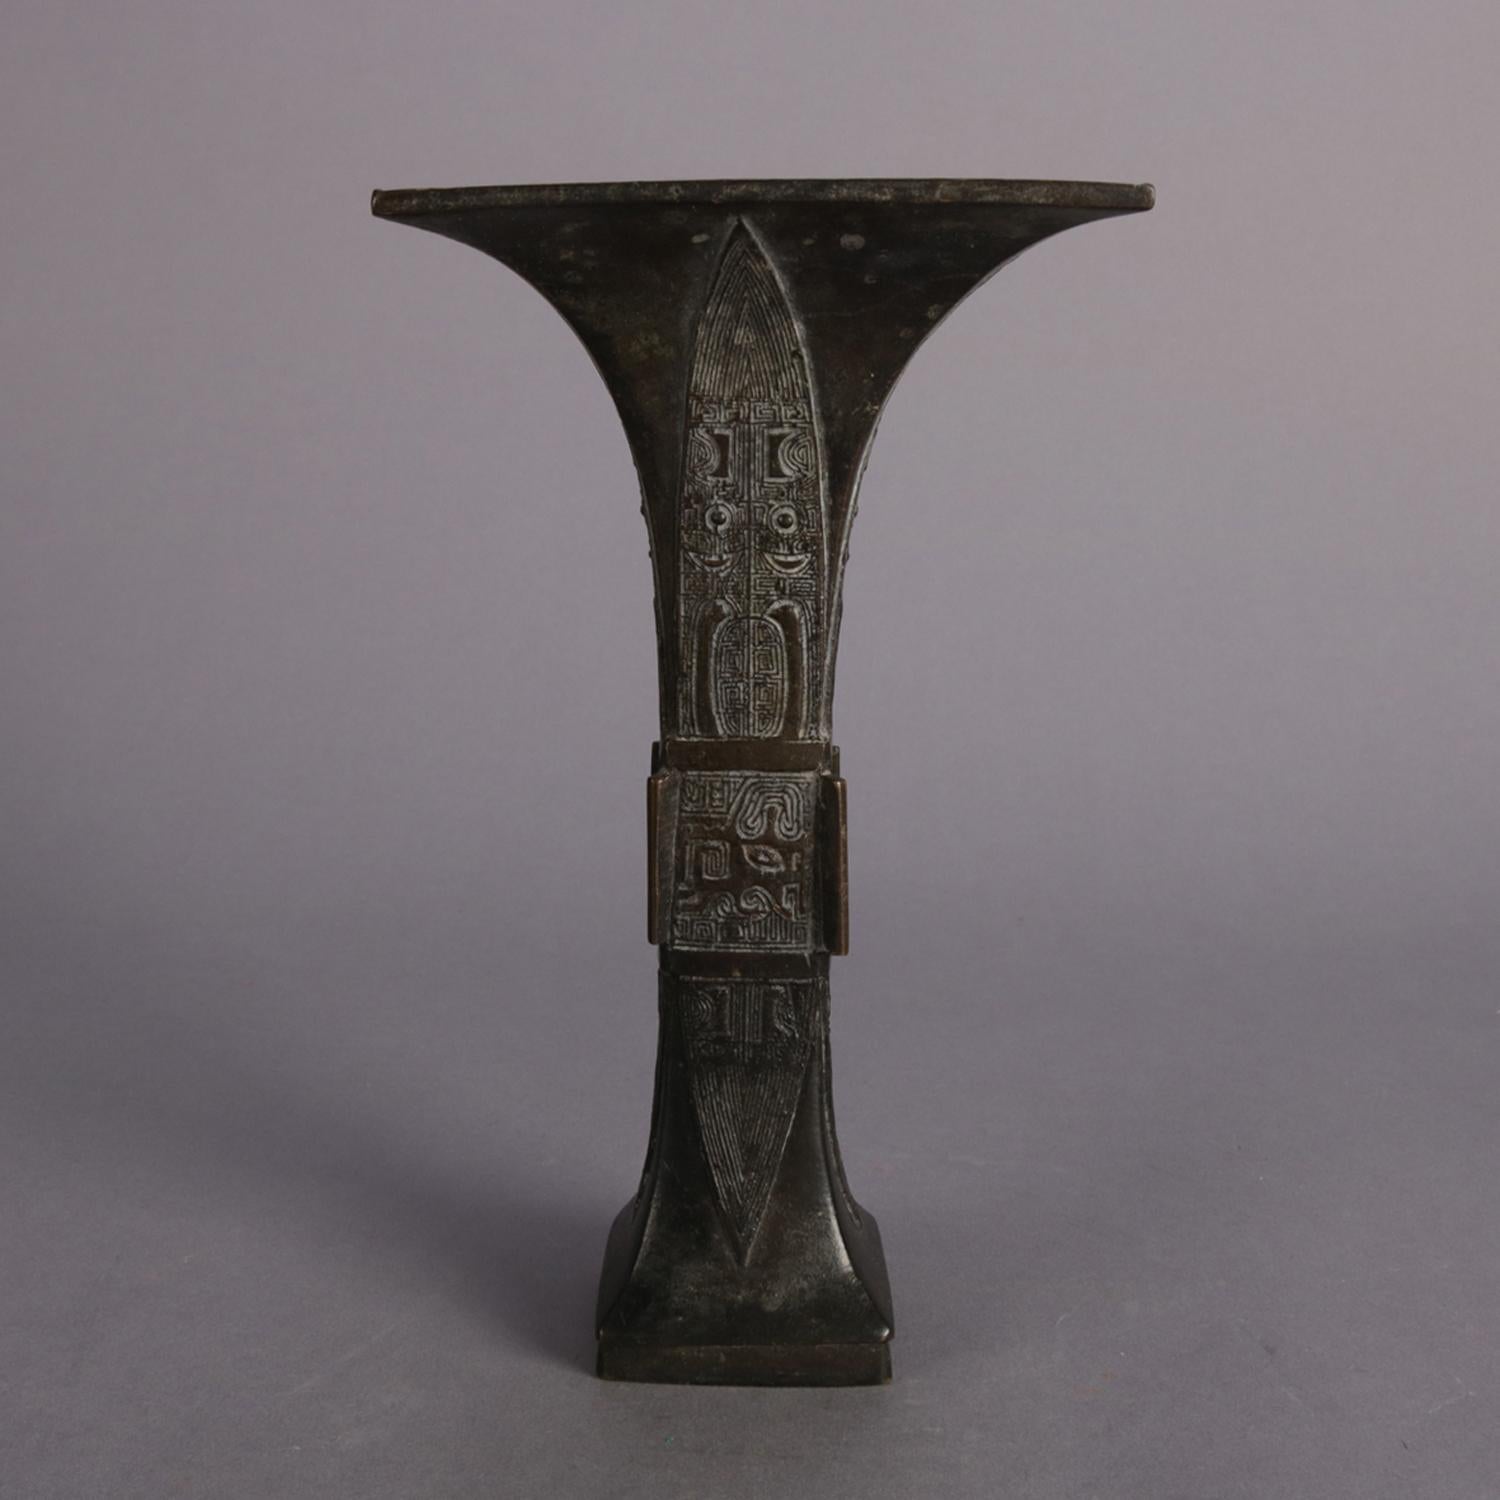 Antique Chinese tribal vase features bronzed metal flared trumpet form construction with reserves having incised tribal symbols, 19th century.

Measures: 8.5